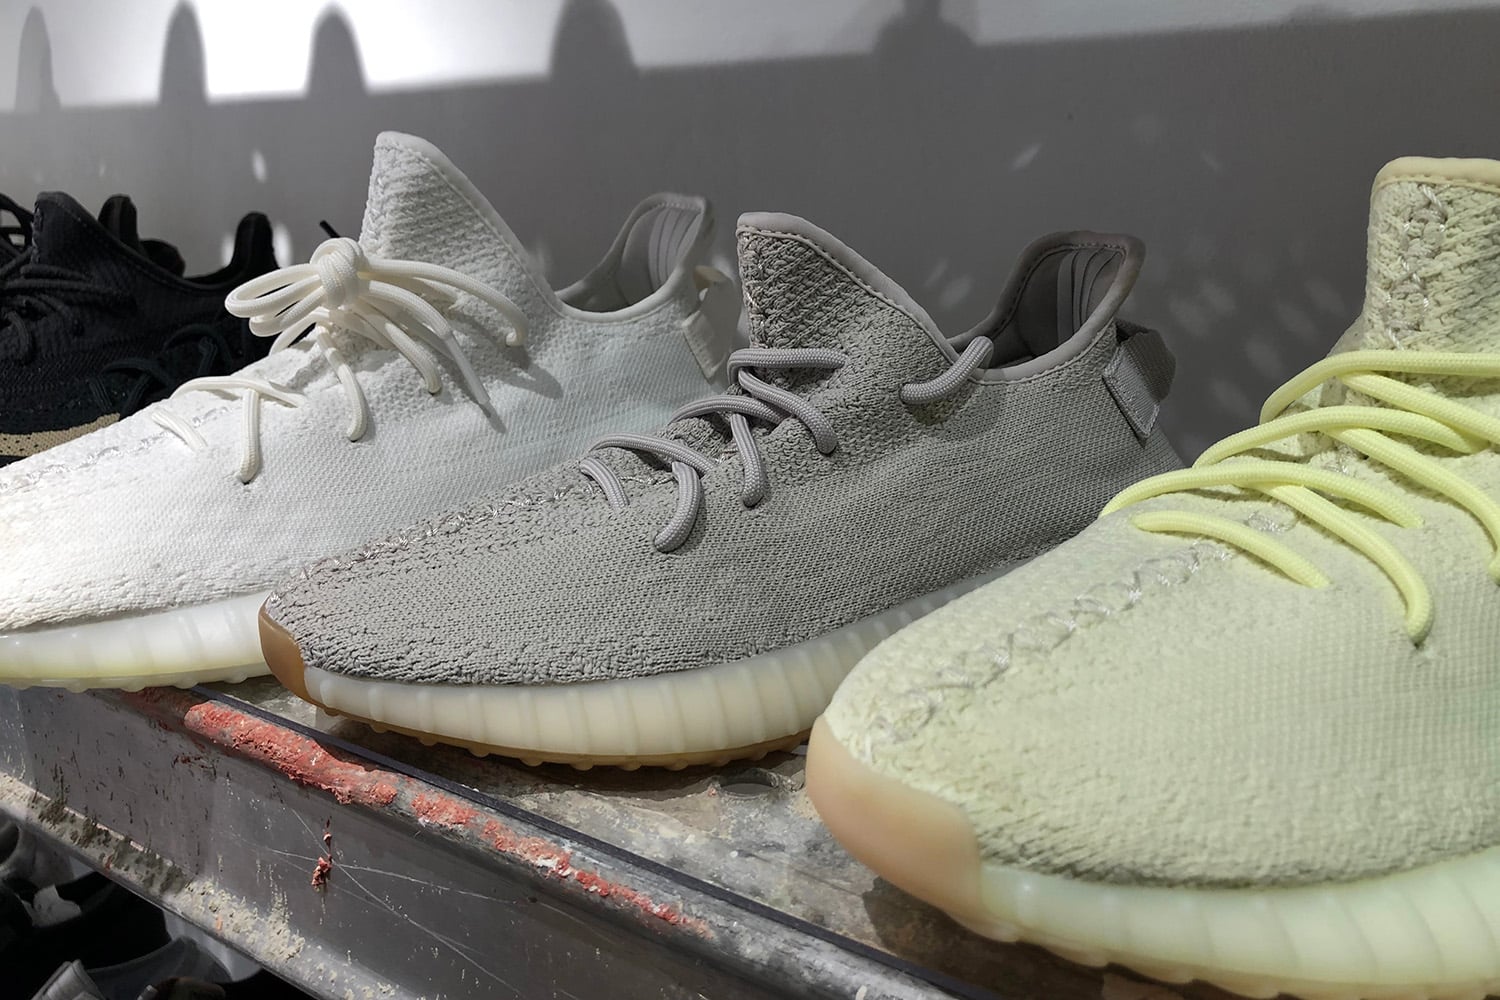 Yeezy Buyers Bail Out Adidas By Snapping Up Leftover Inventory